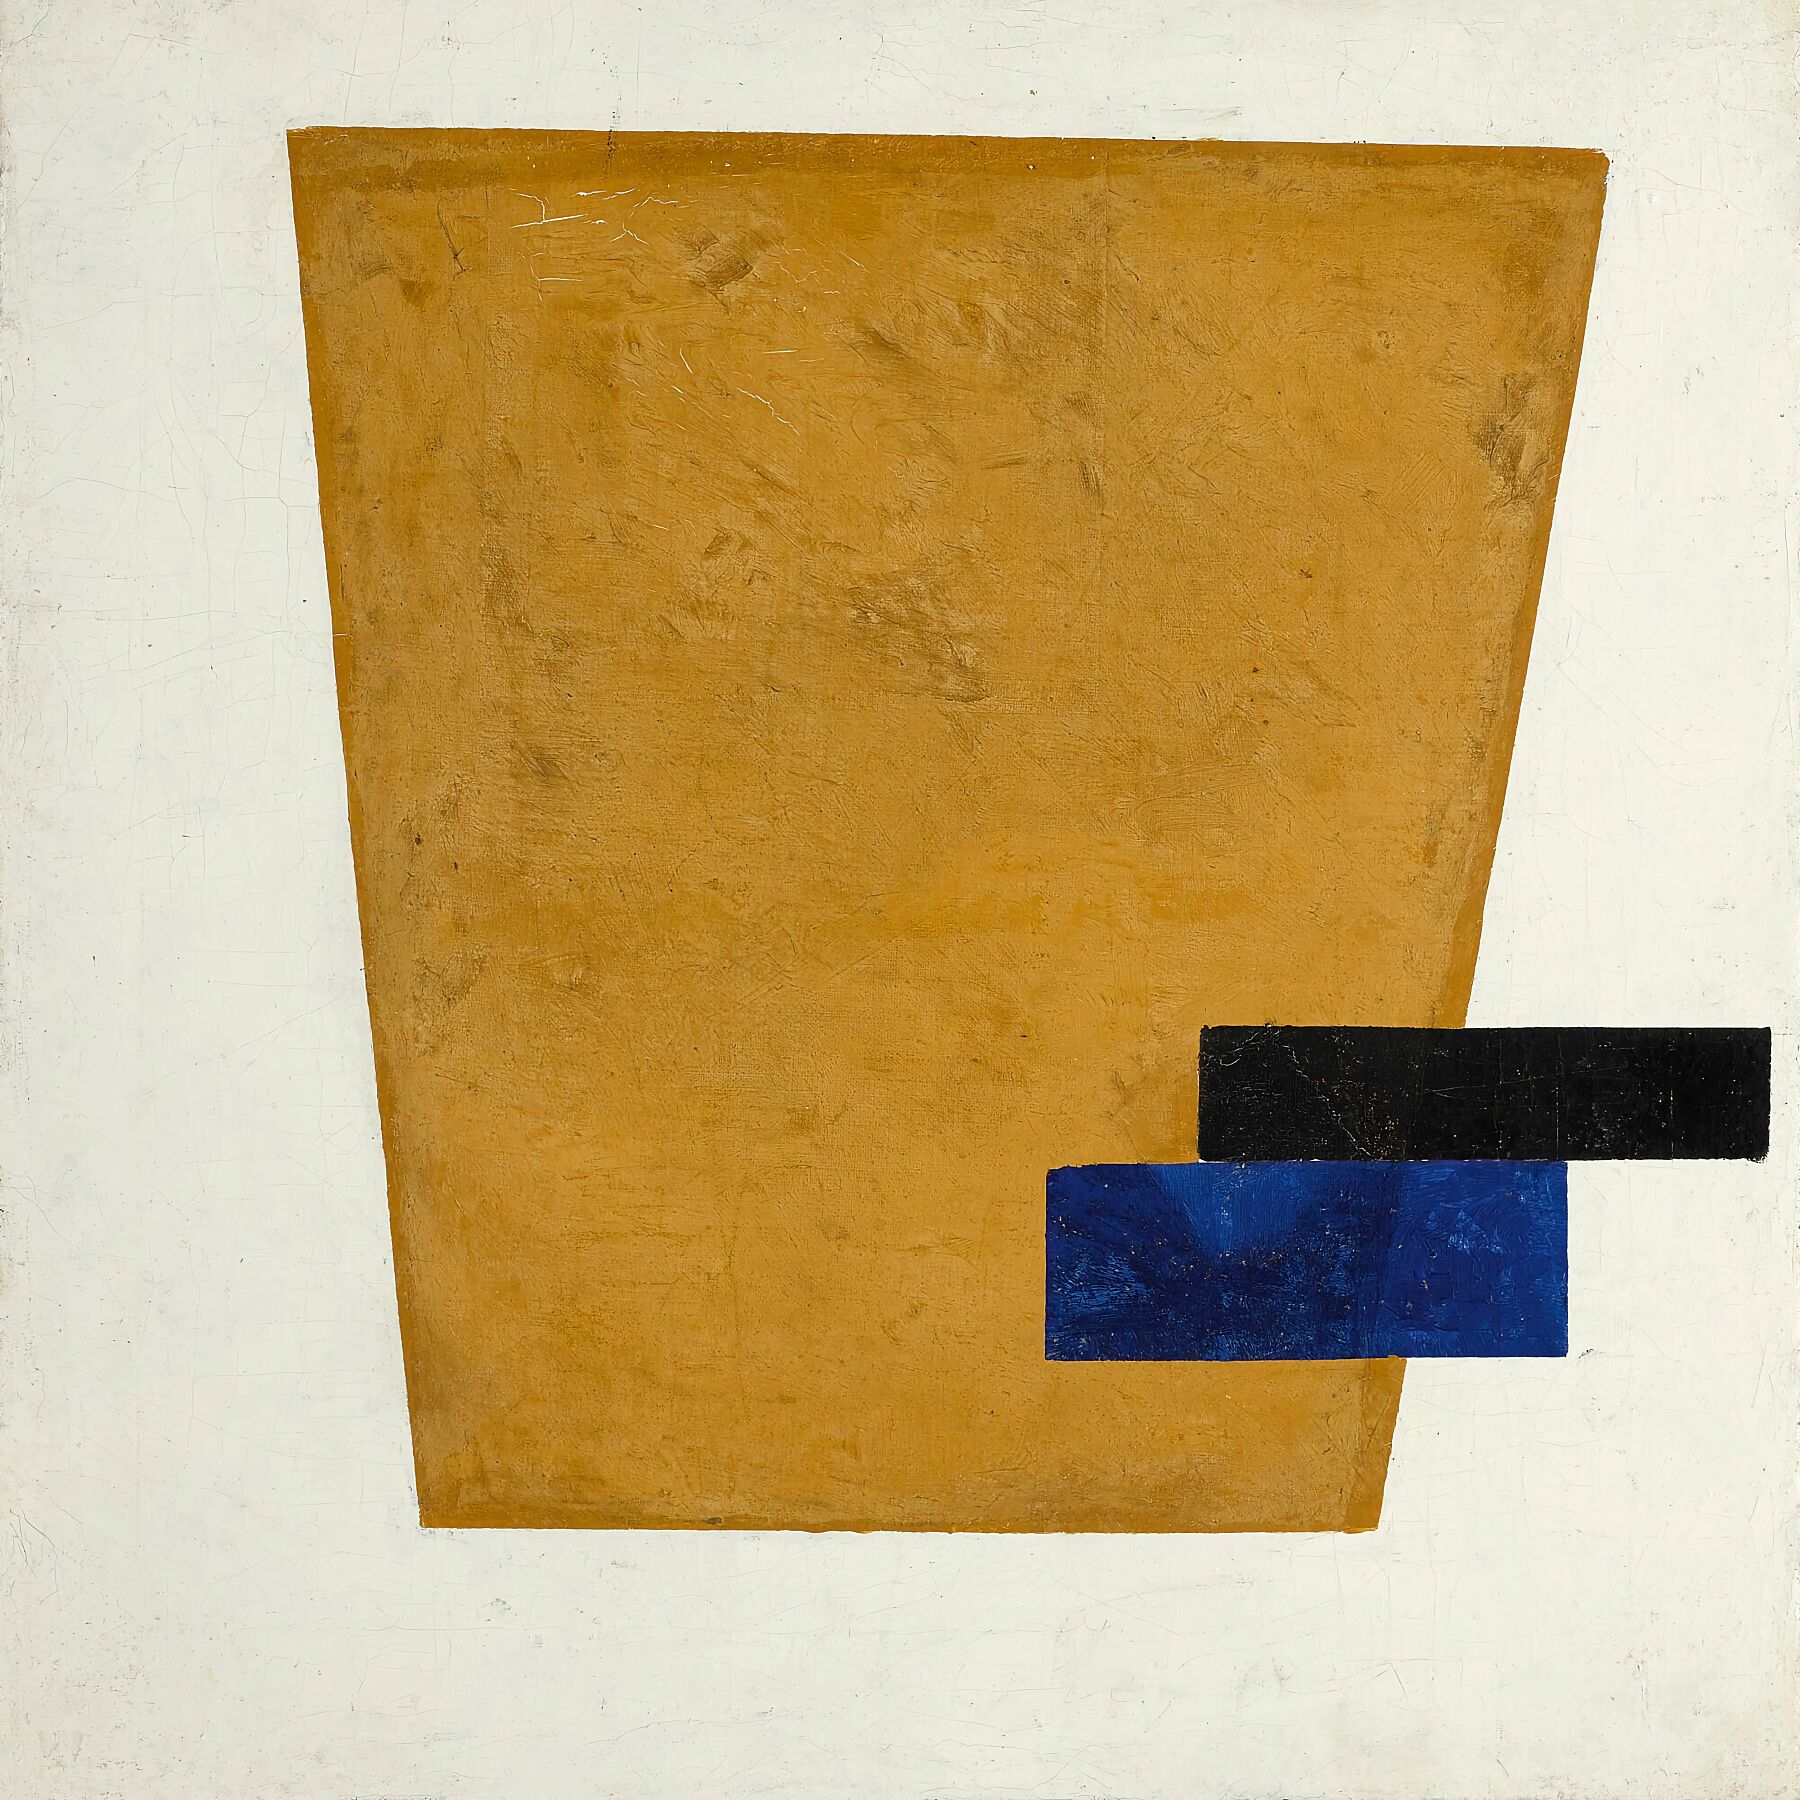 Suprematist Composition with Plane in Projection by Kazimir Malevich - 1915